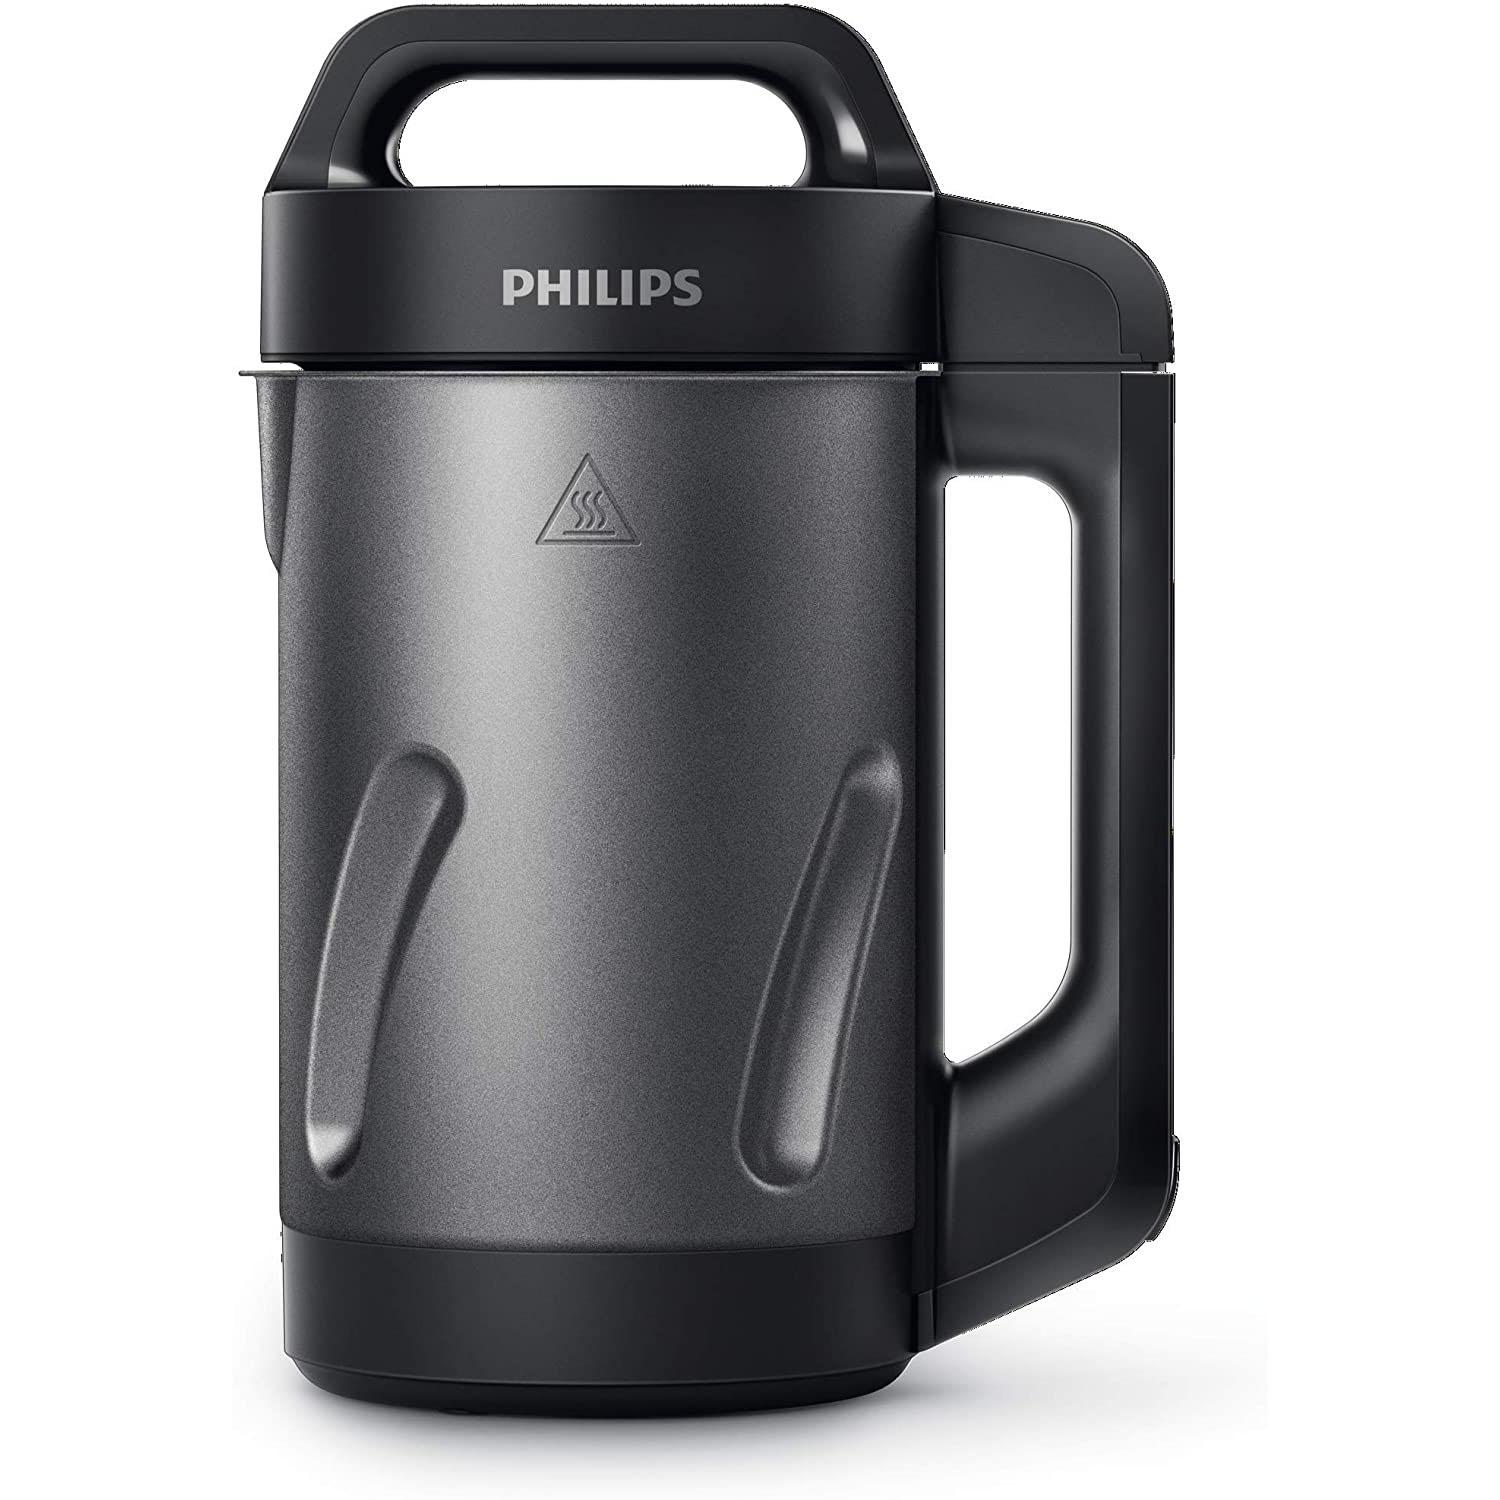 Philips Kitchen Appliances Philips Soup Maker for $79.95 Shipped